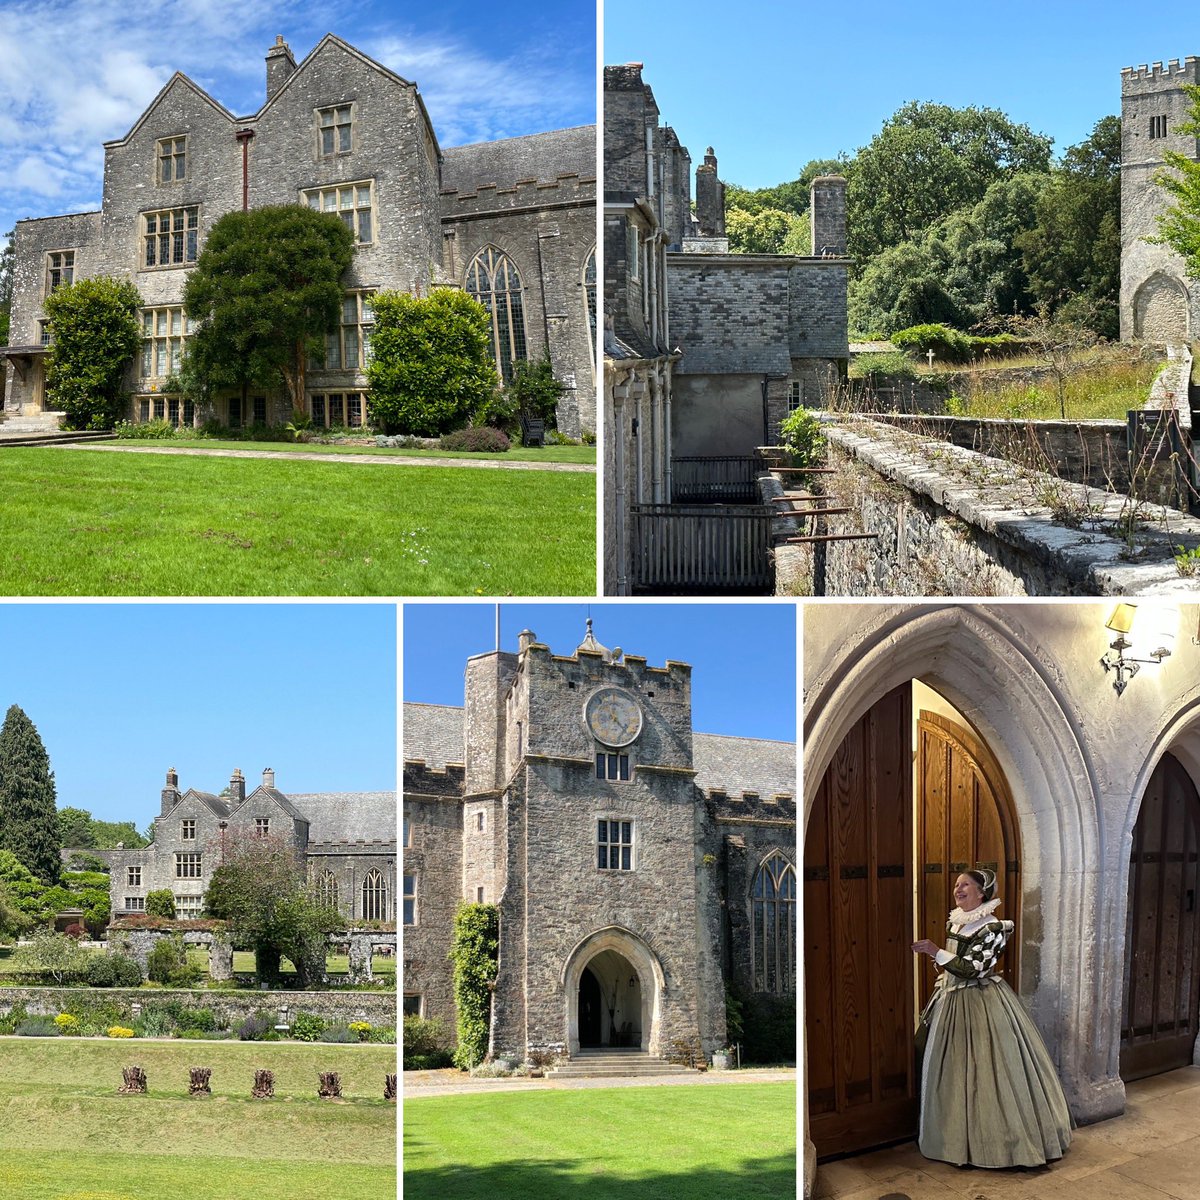 #histficmay Day16 One of the most challenging aspects of the setting for my writing is looking beyond what’s there today to see places like Dartington Hall @DartingtonTrust through the eyes of its 16th century residents #writersresearch